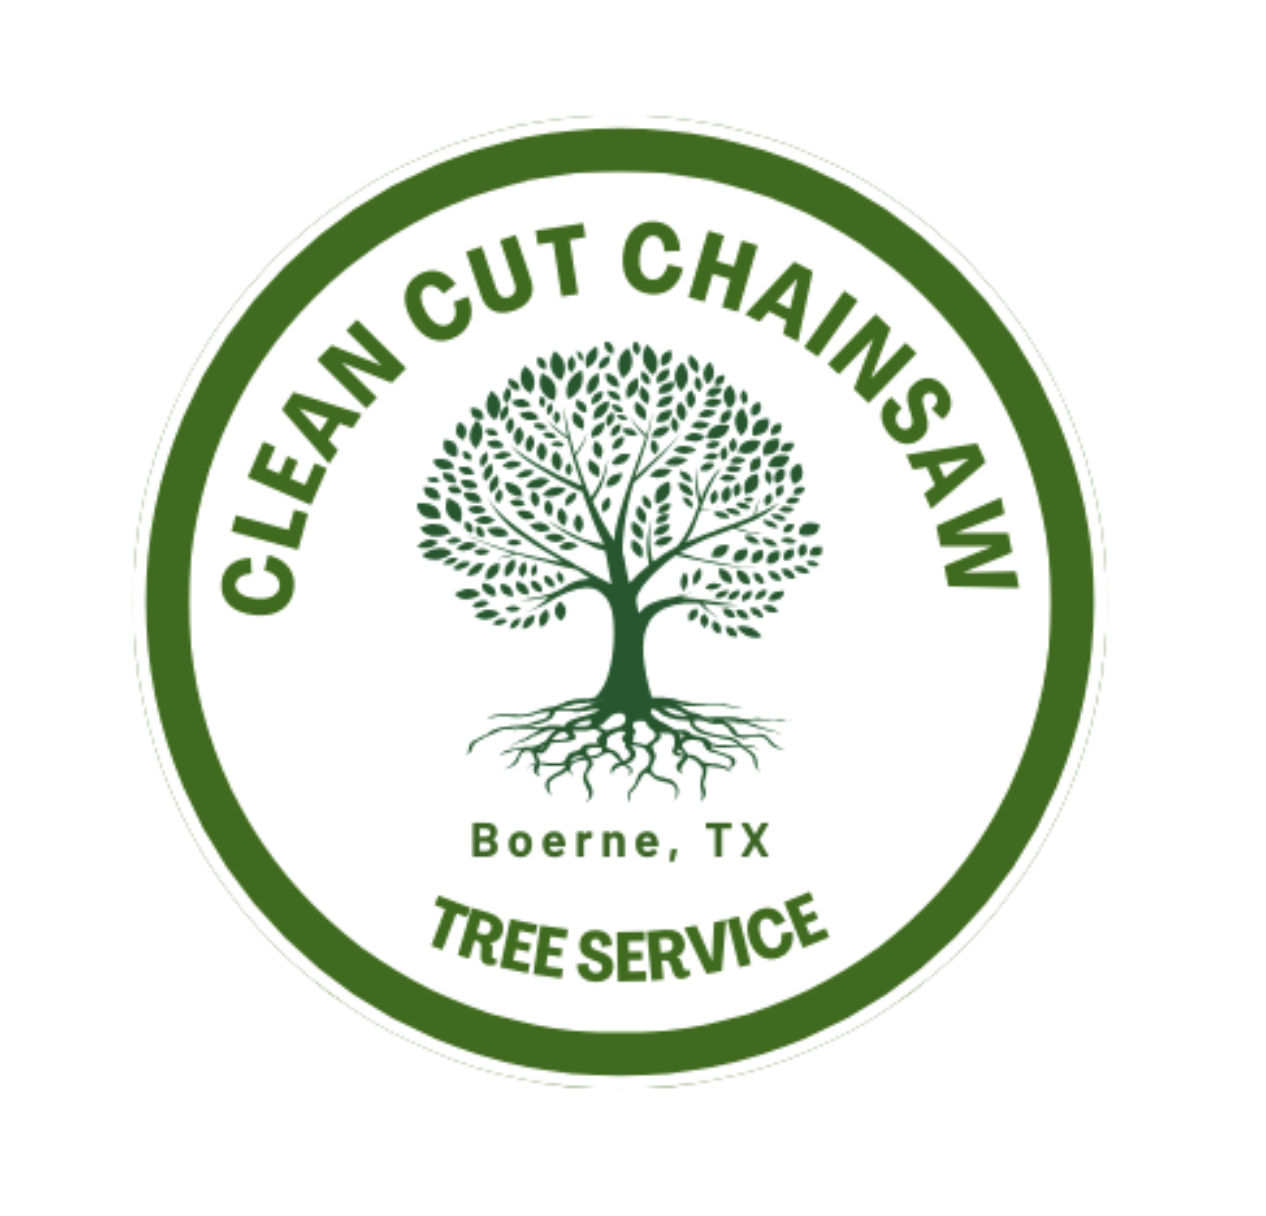 Clean-Cut-Chainsaw-Tree-Service.png